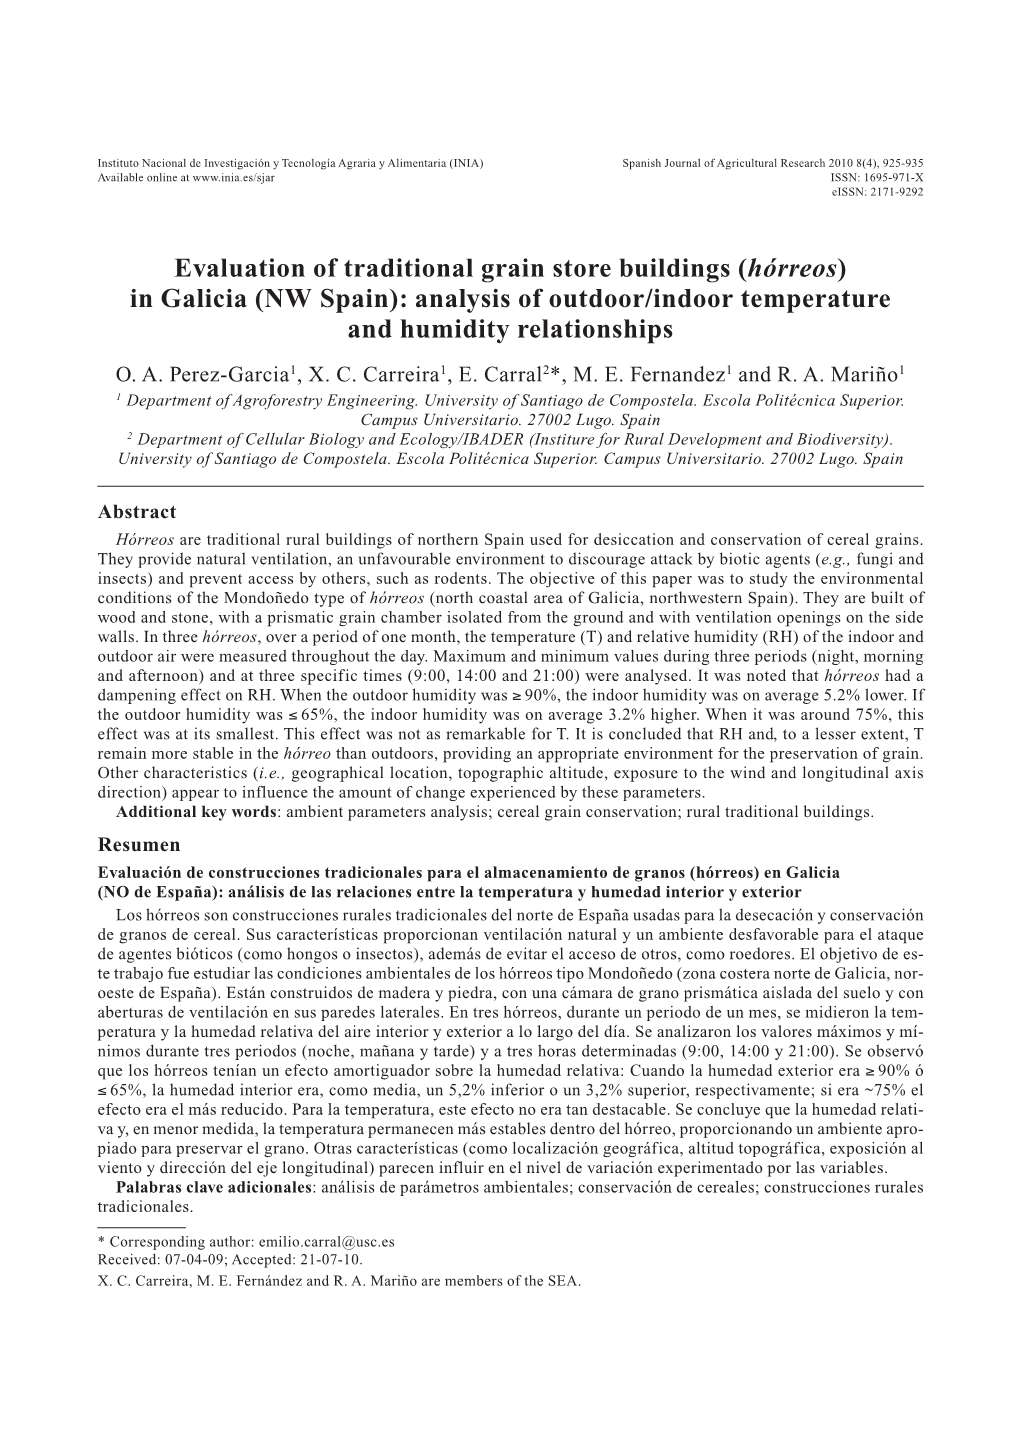 Evaluation of Traditional Grain Store Buildings (Hórreos) in Galicia (NW Spain): Analysis of Outdoor/Indoor Temperature and Humidity Relationships O